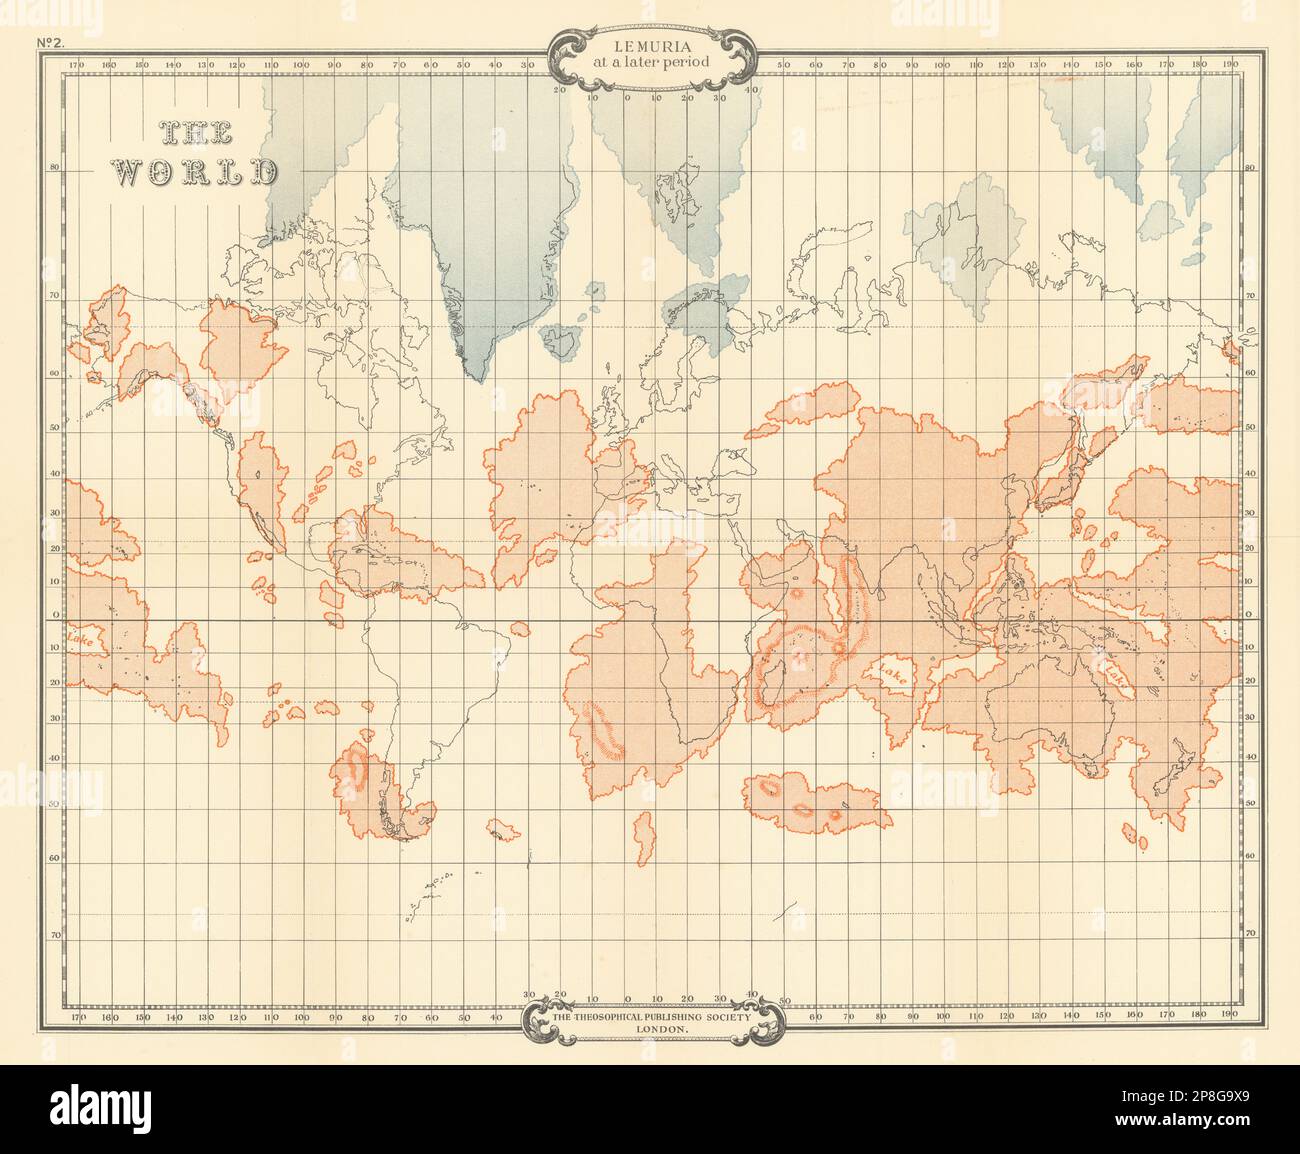 The World showing Lemuria at a later period. SCOTT-ELLIOT 1925 old vintage map Stock Photo